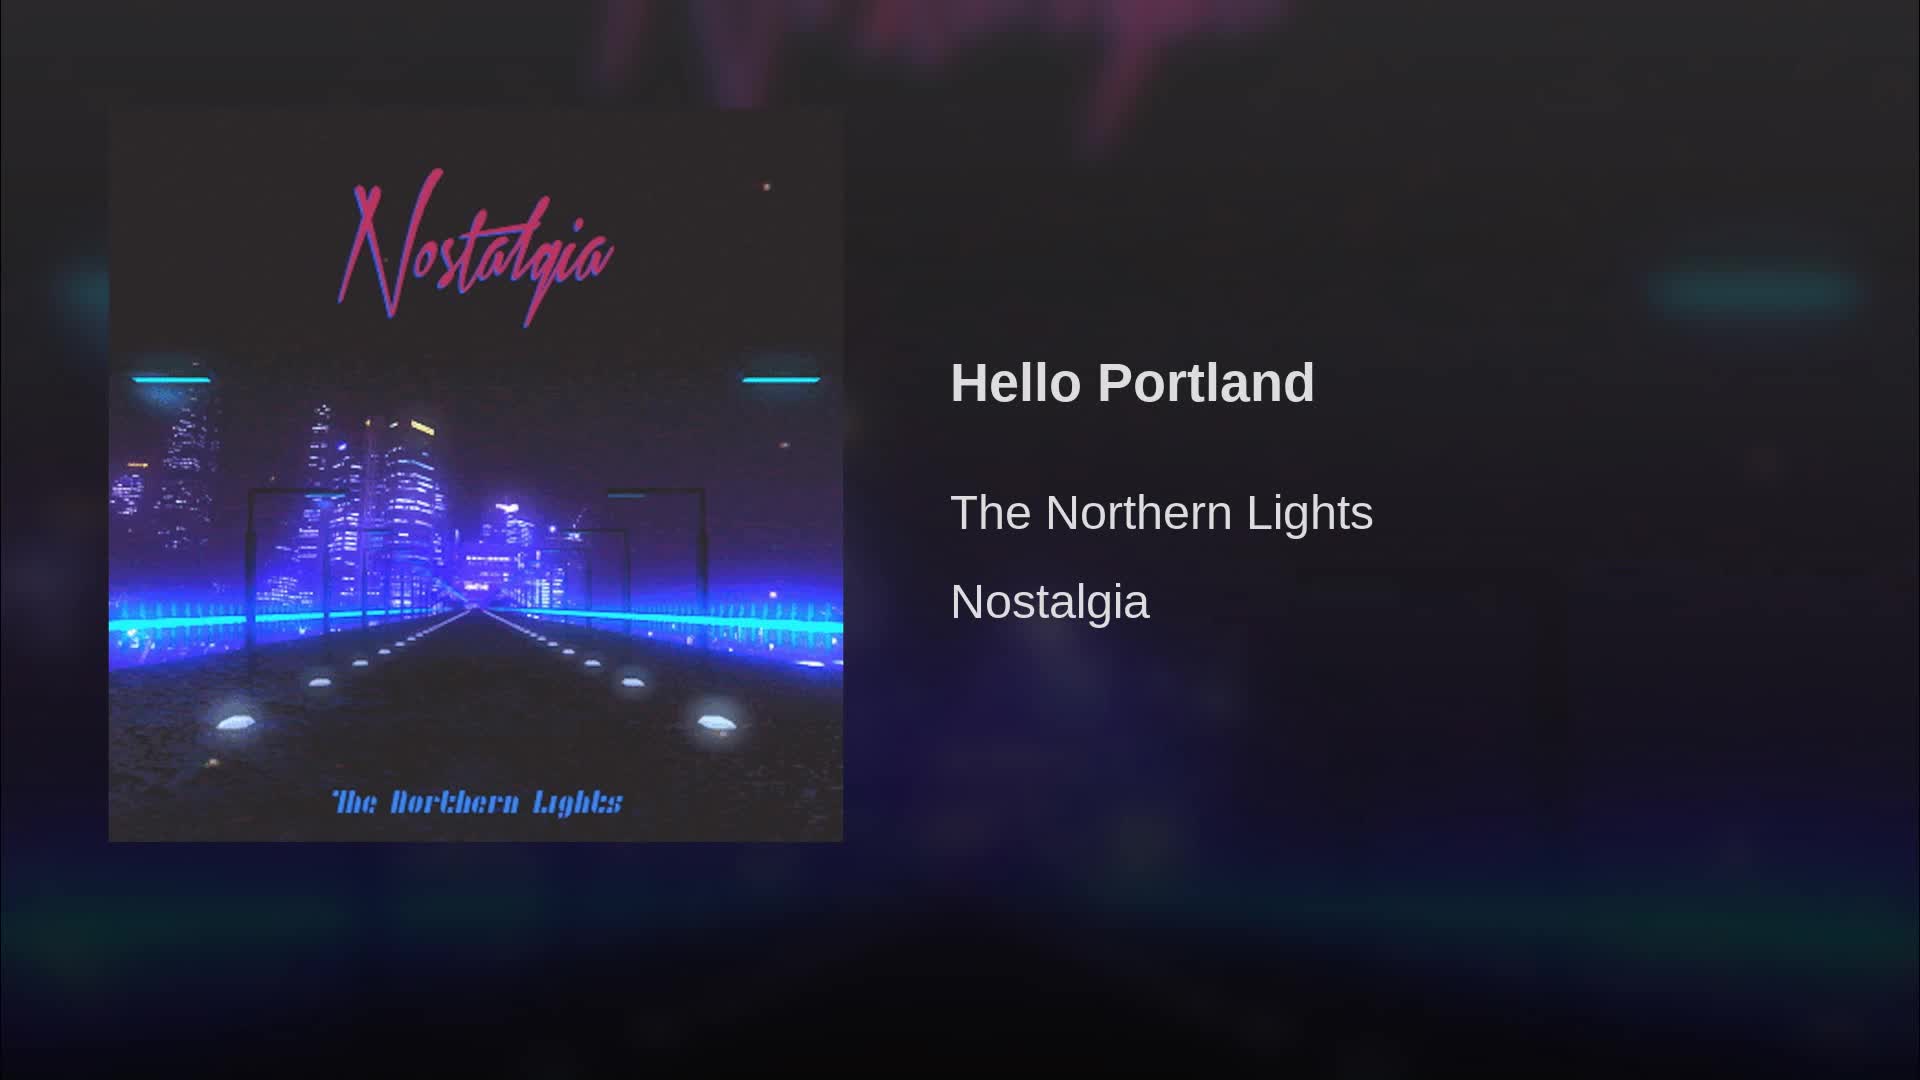 Hello Portland by The Northern Lights. .